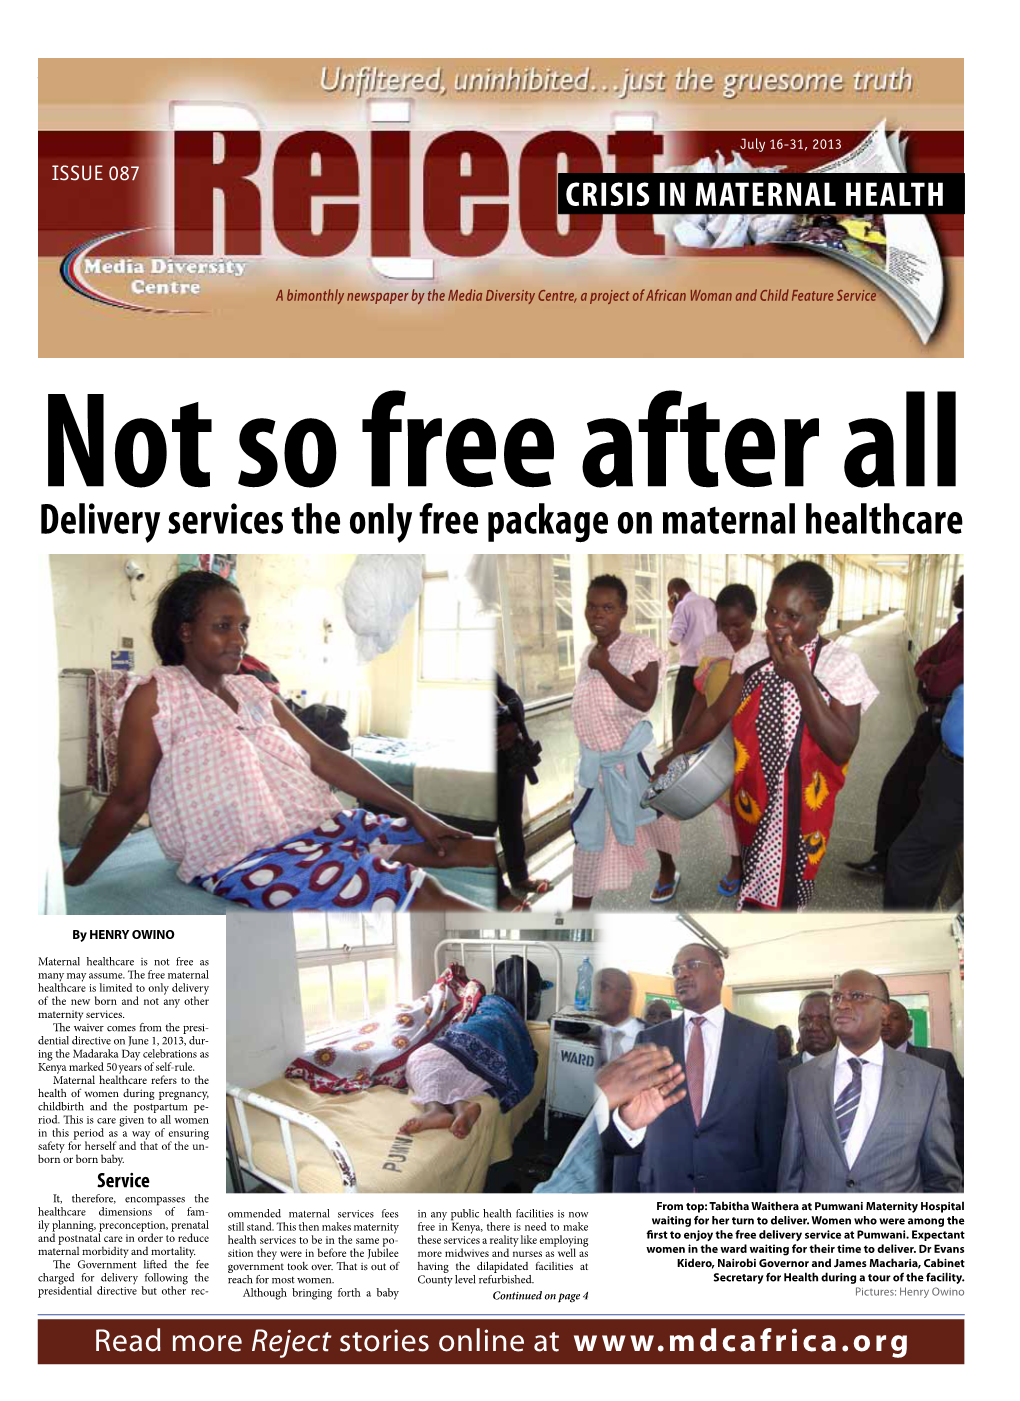 Delivery Services the Only Free Package on Maternal Healthcare